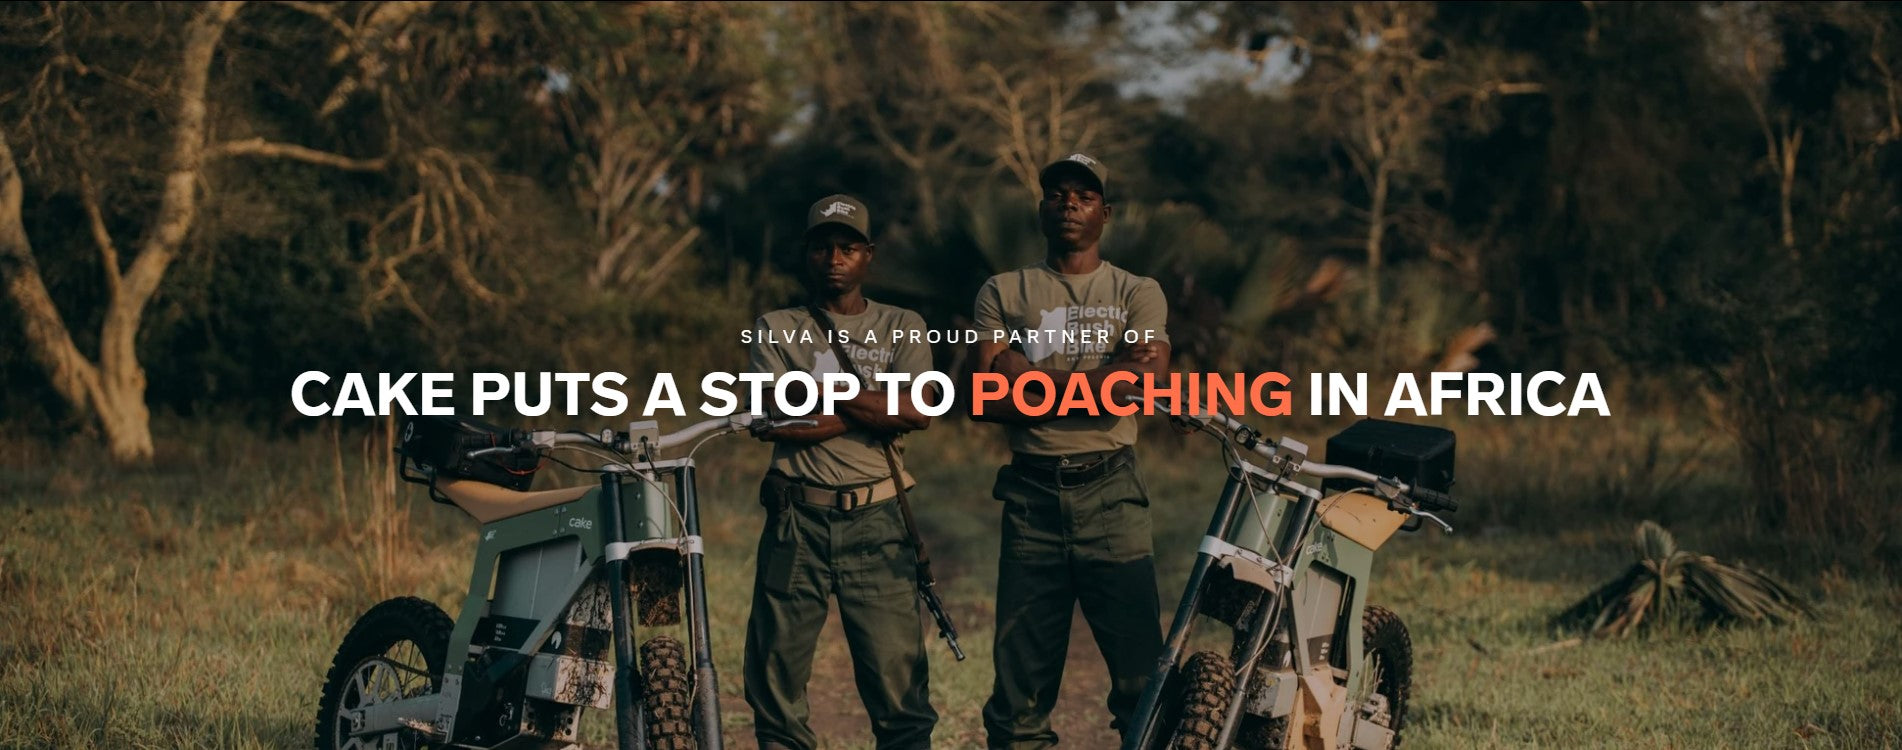 Cake puts a stop to poaching in Africa